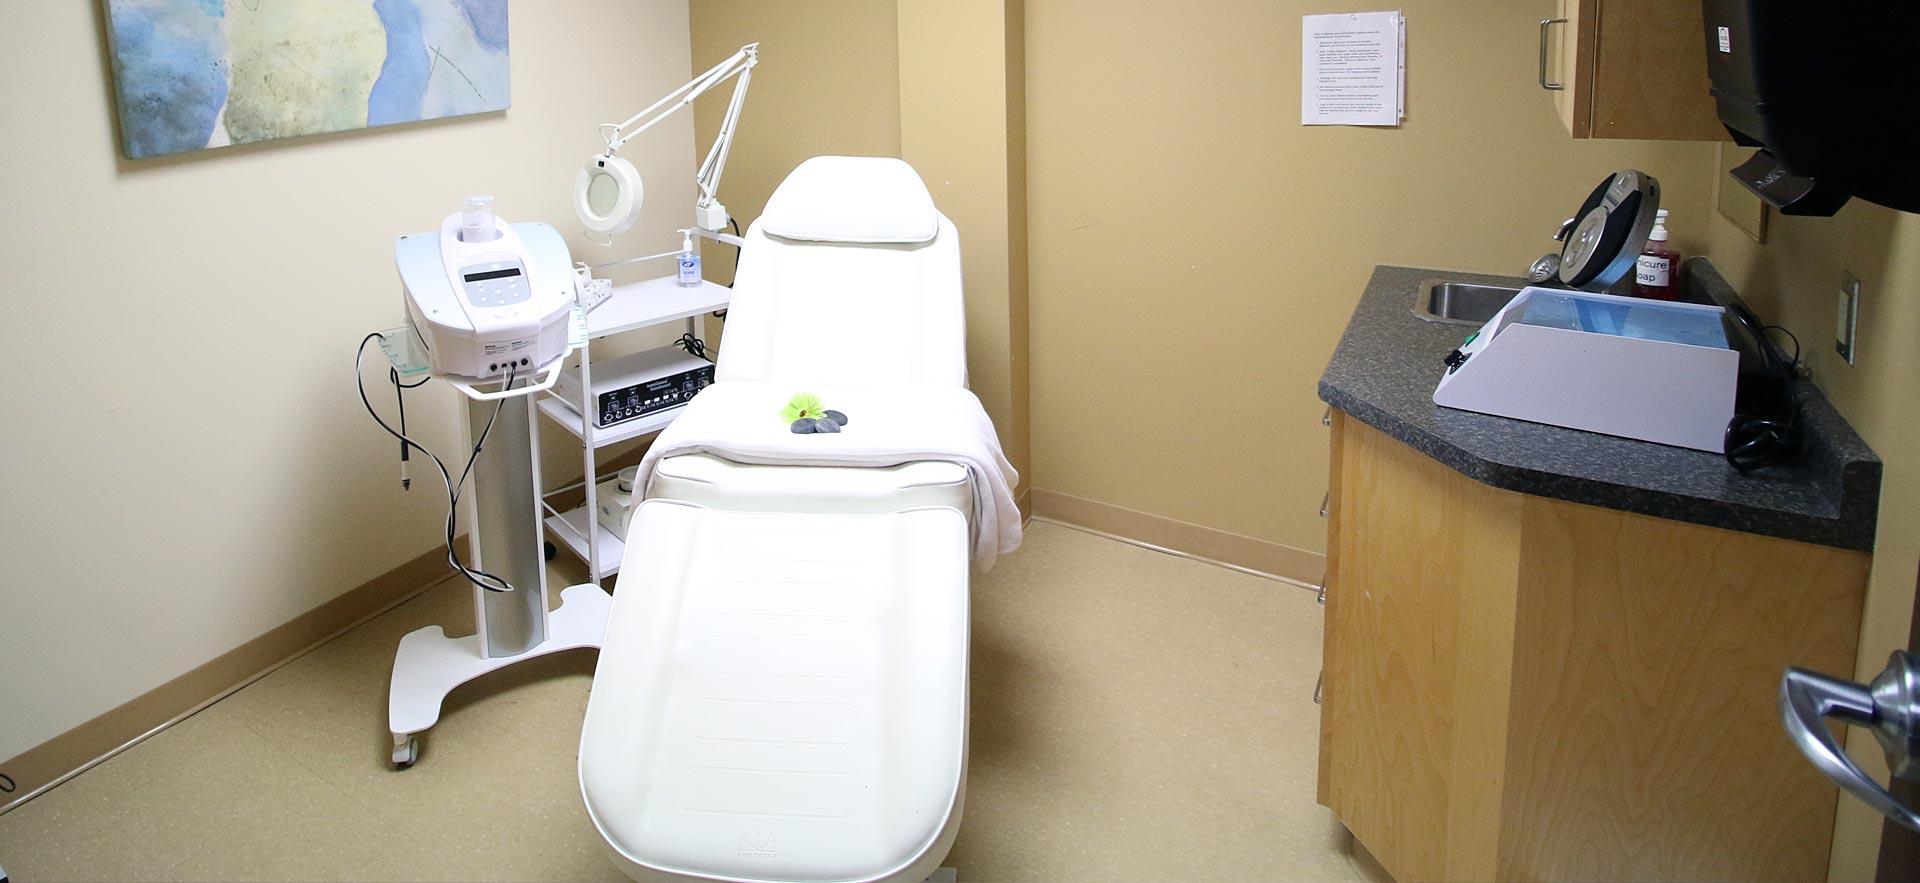 Esthetician chair and treatment room.